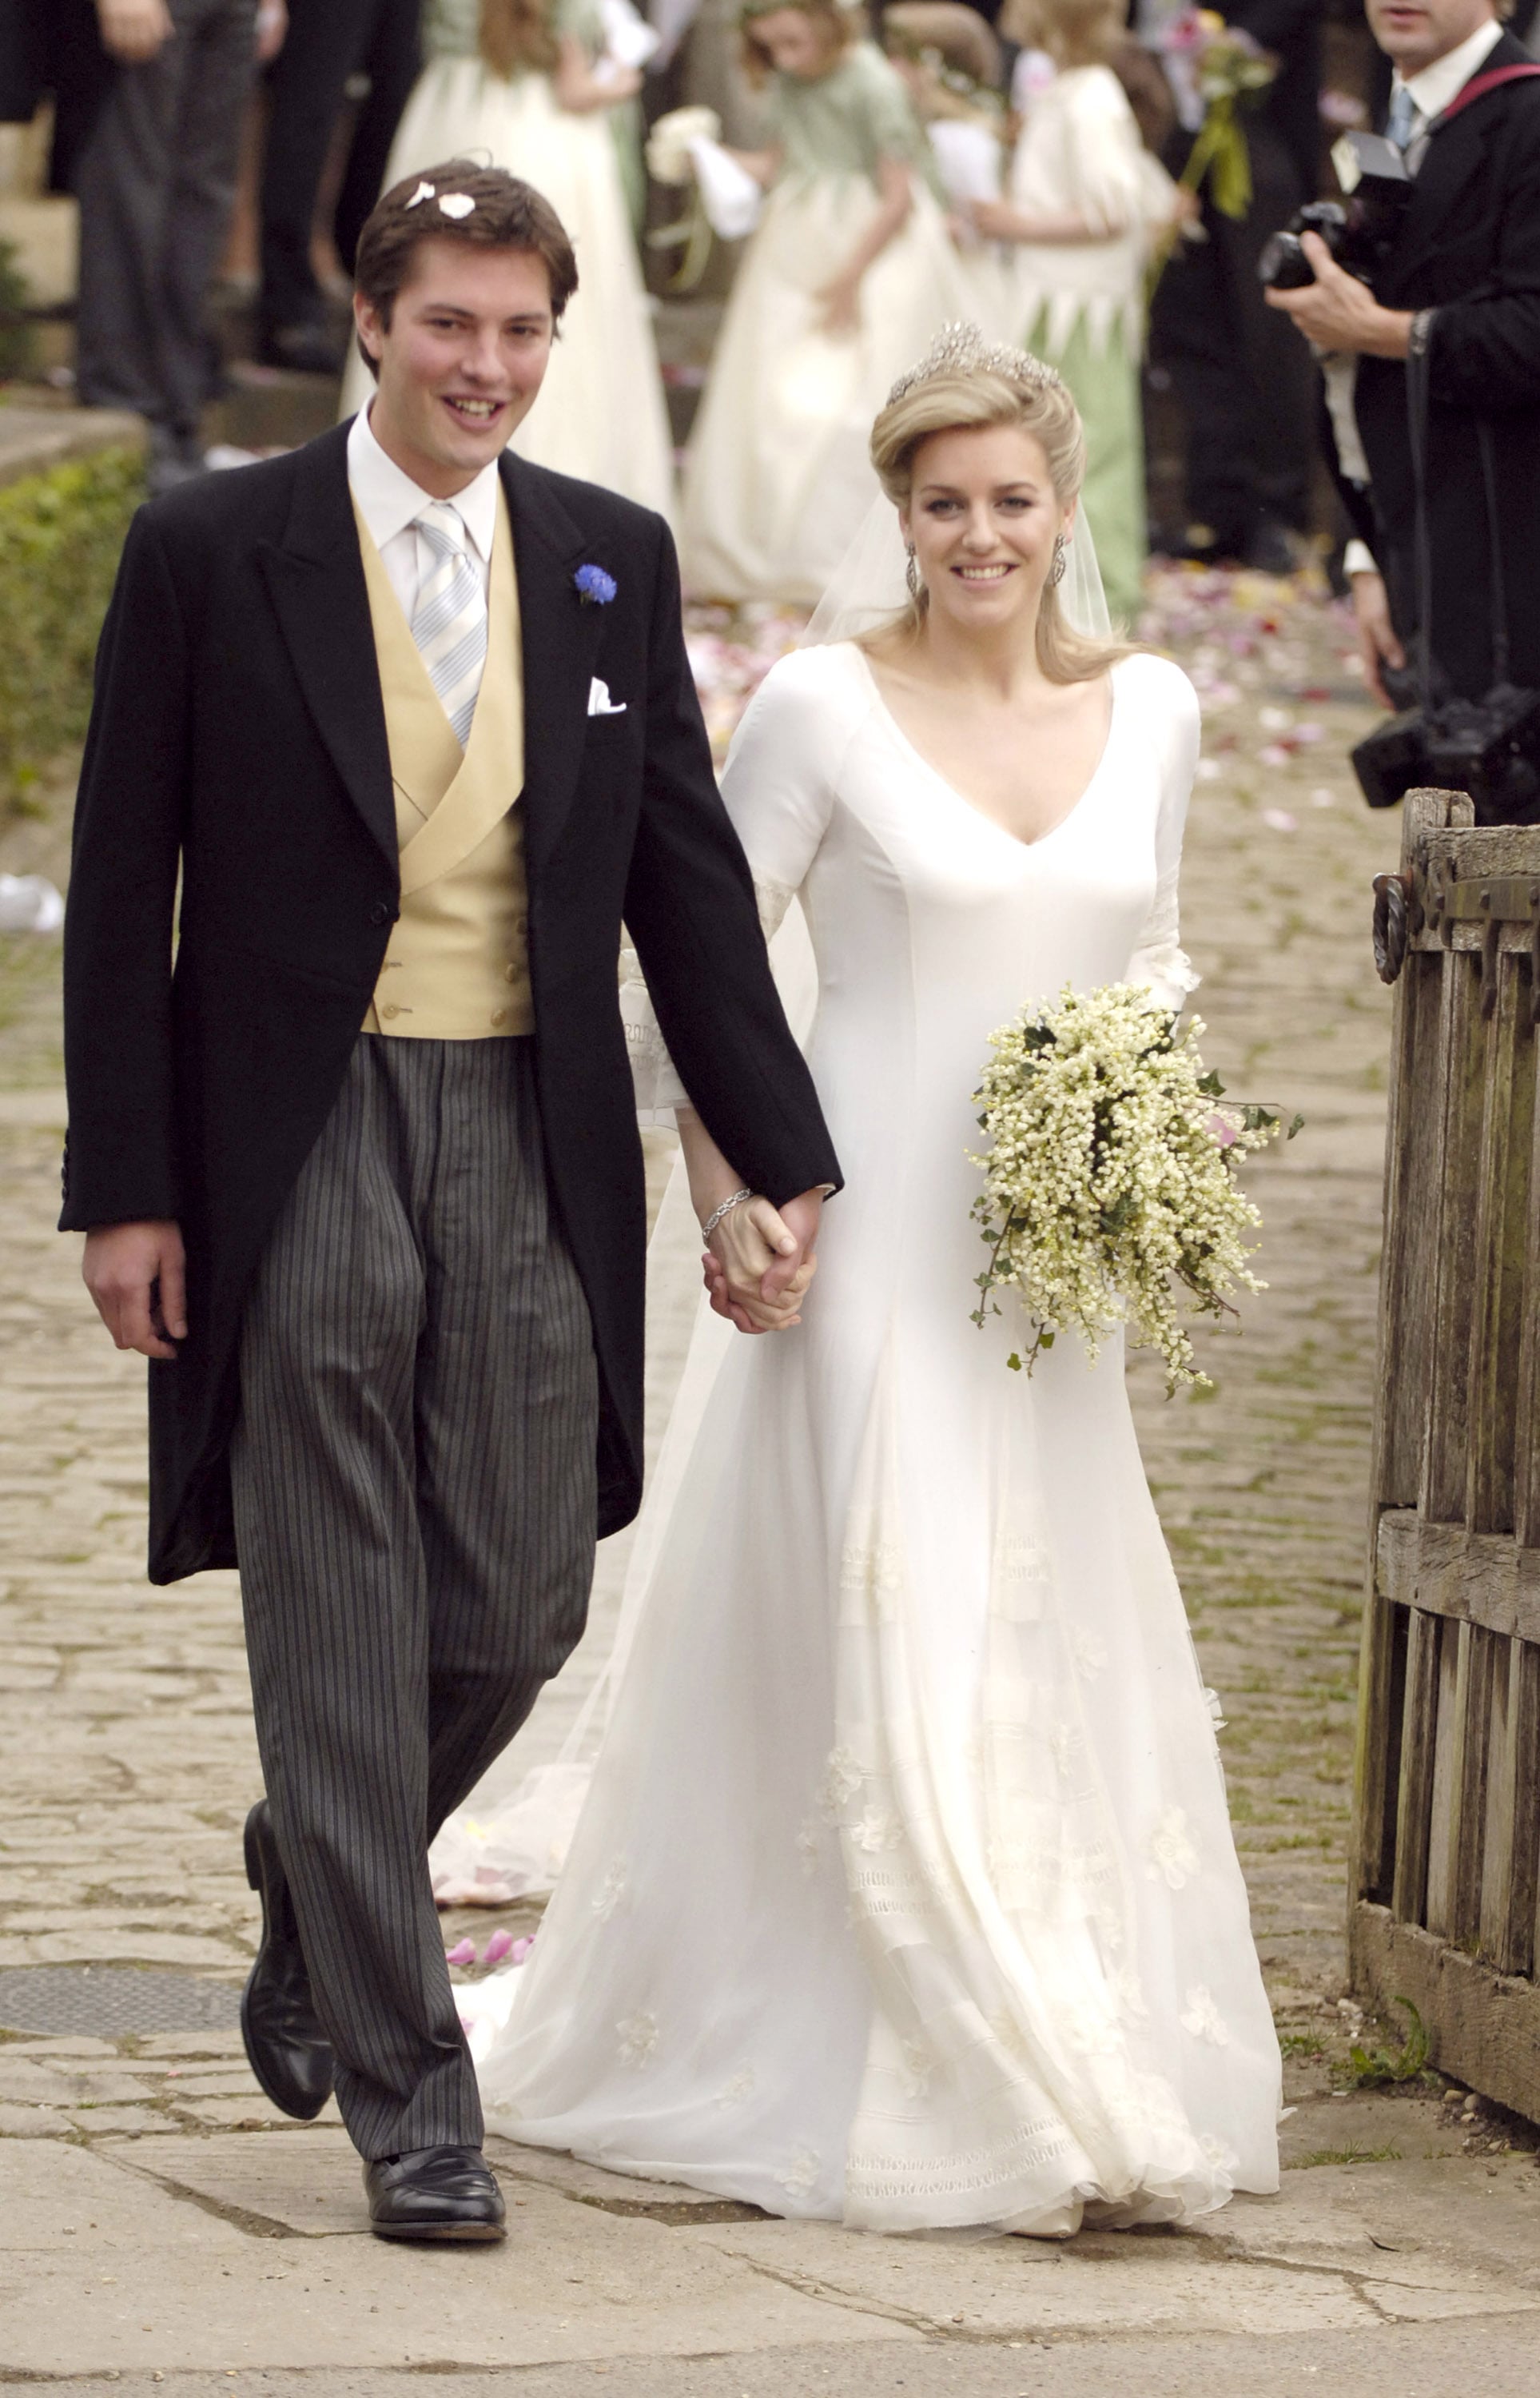 Top Camilla Parker Bowles Wedding Dress of the decade The ultimate guide 